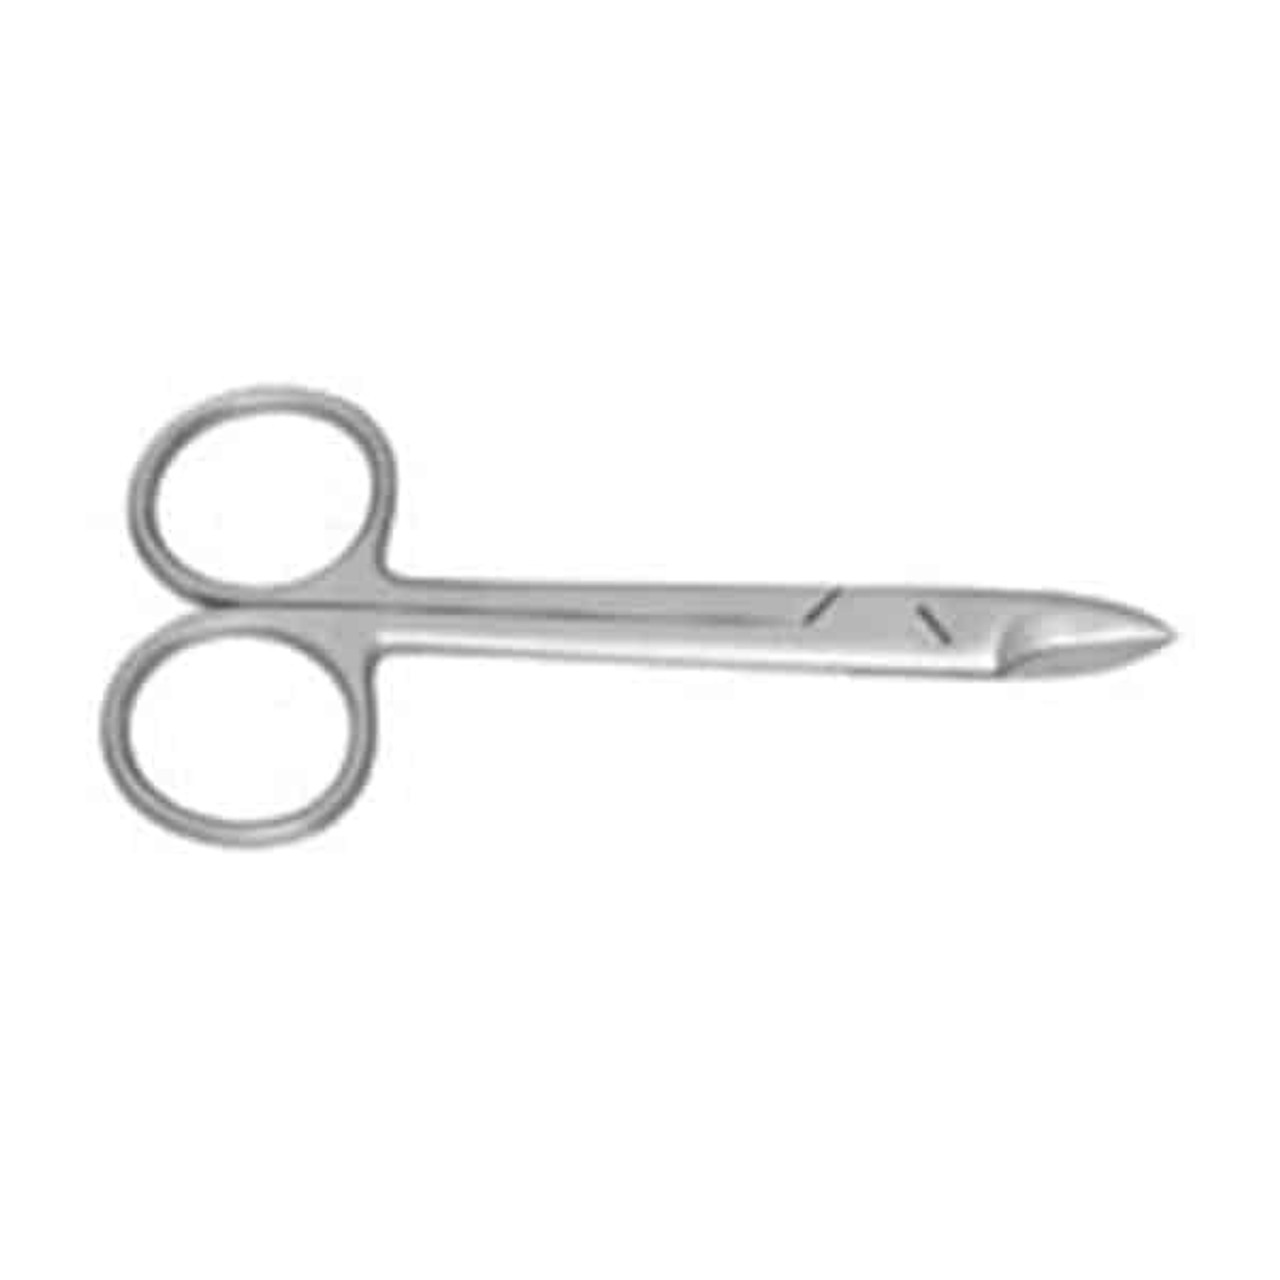 Nordent - Scissors, Crown and Collar Curved, 4" (100 mm)